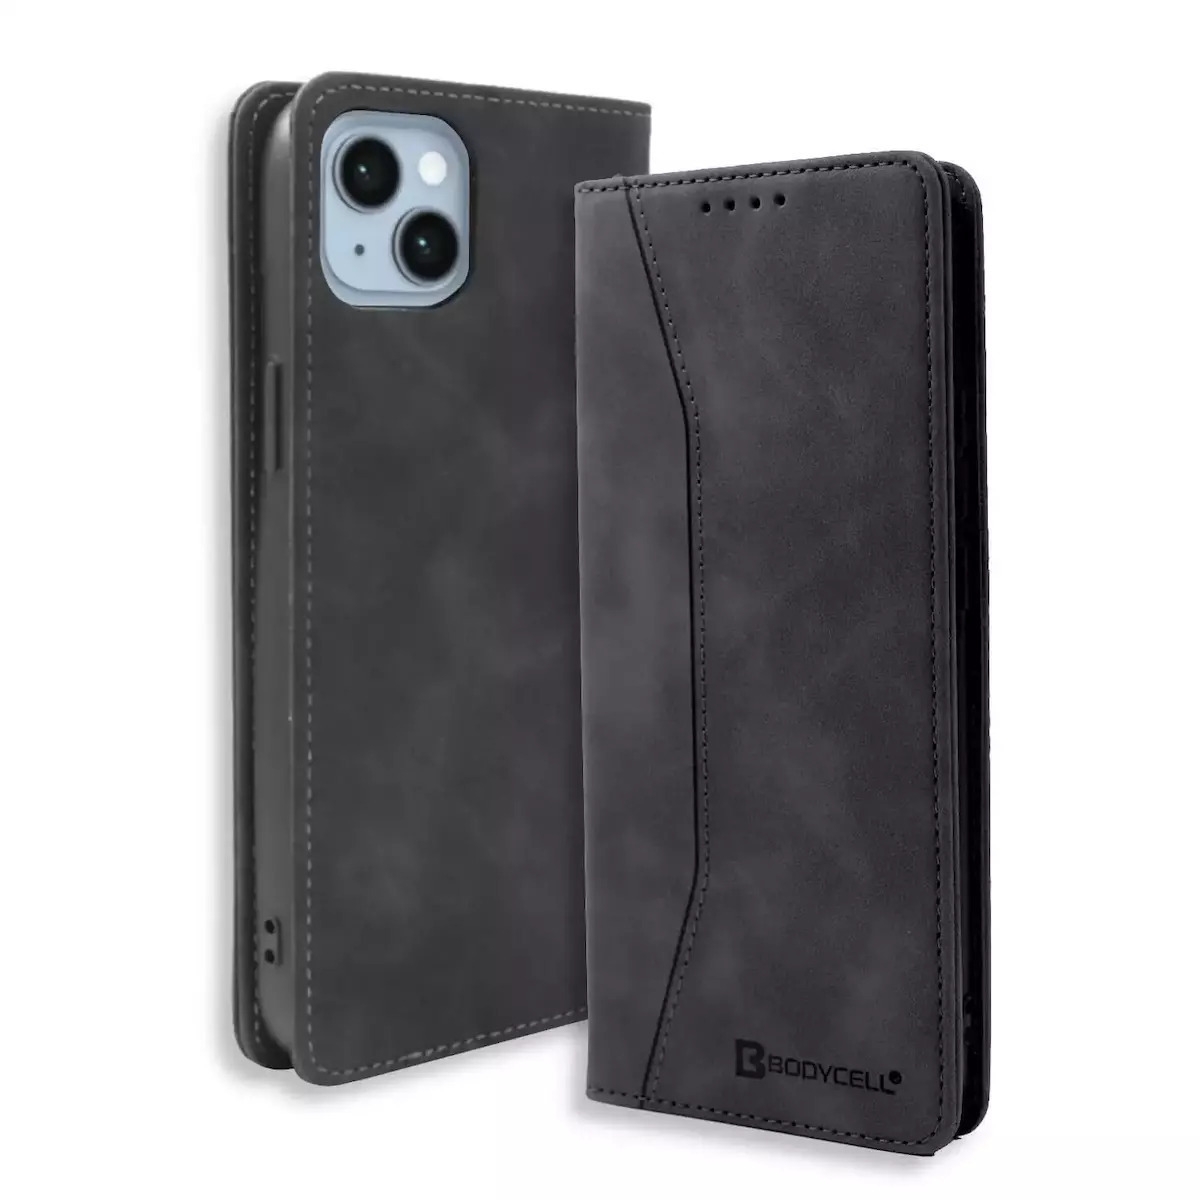 Bodycell Bodycell Book Case Pu Leather For Apple IPhone 14 Black (200-109-944)